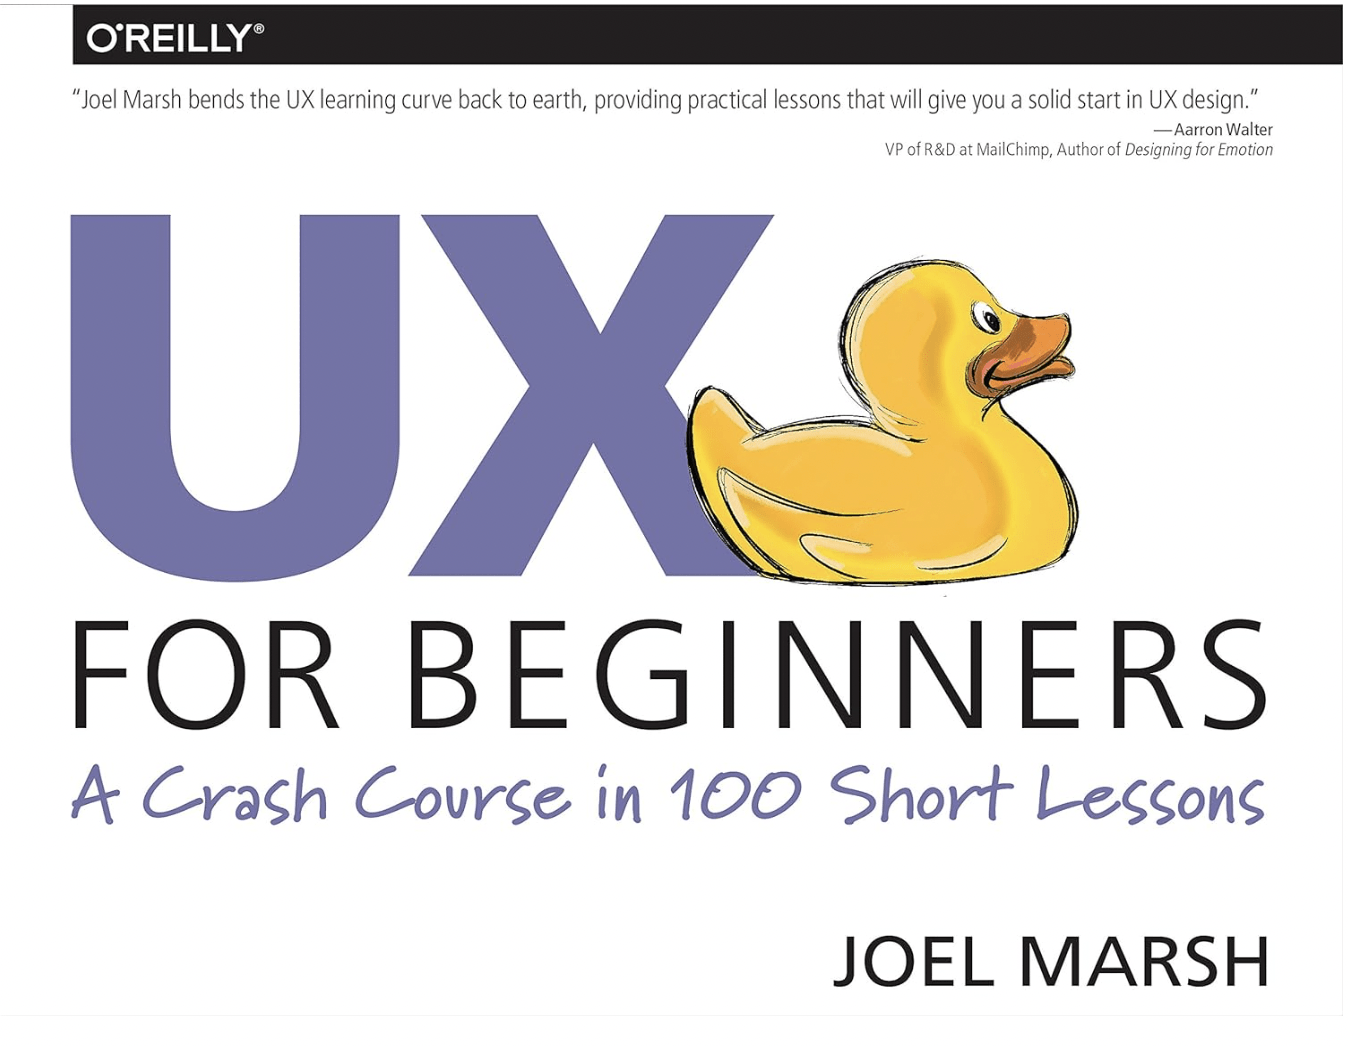 UX for Beginners: A Crash Course in 100 Short Lessons